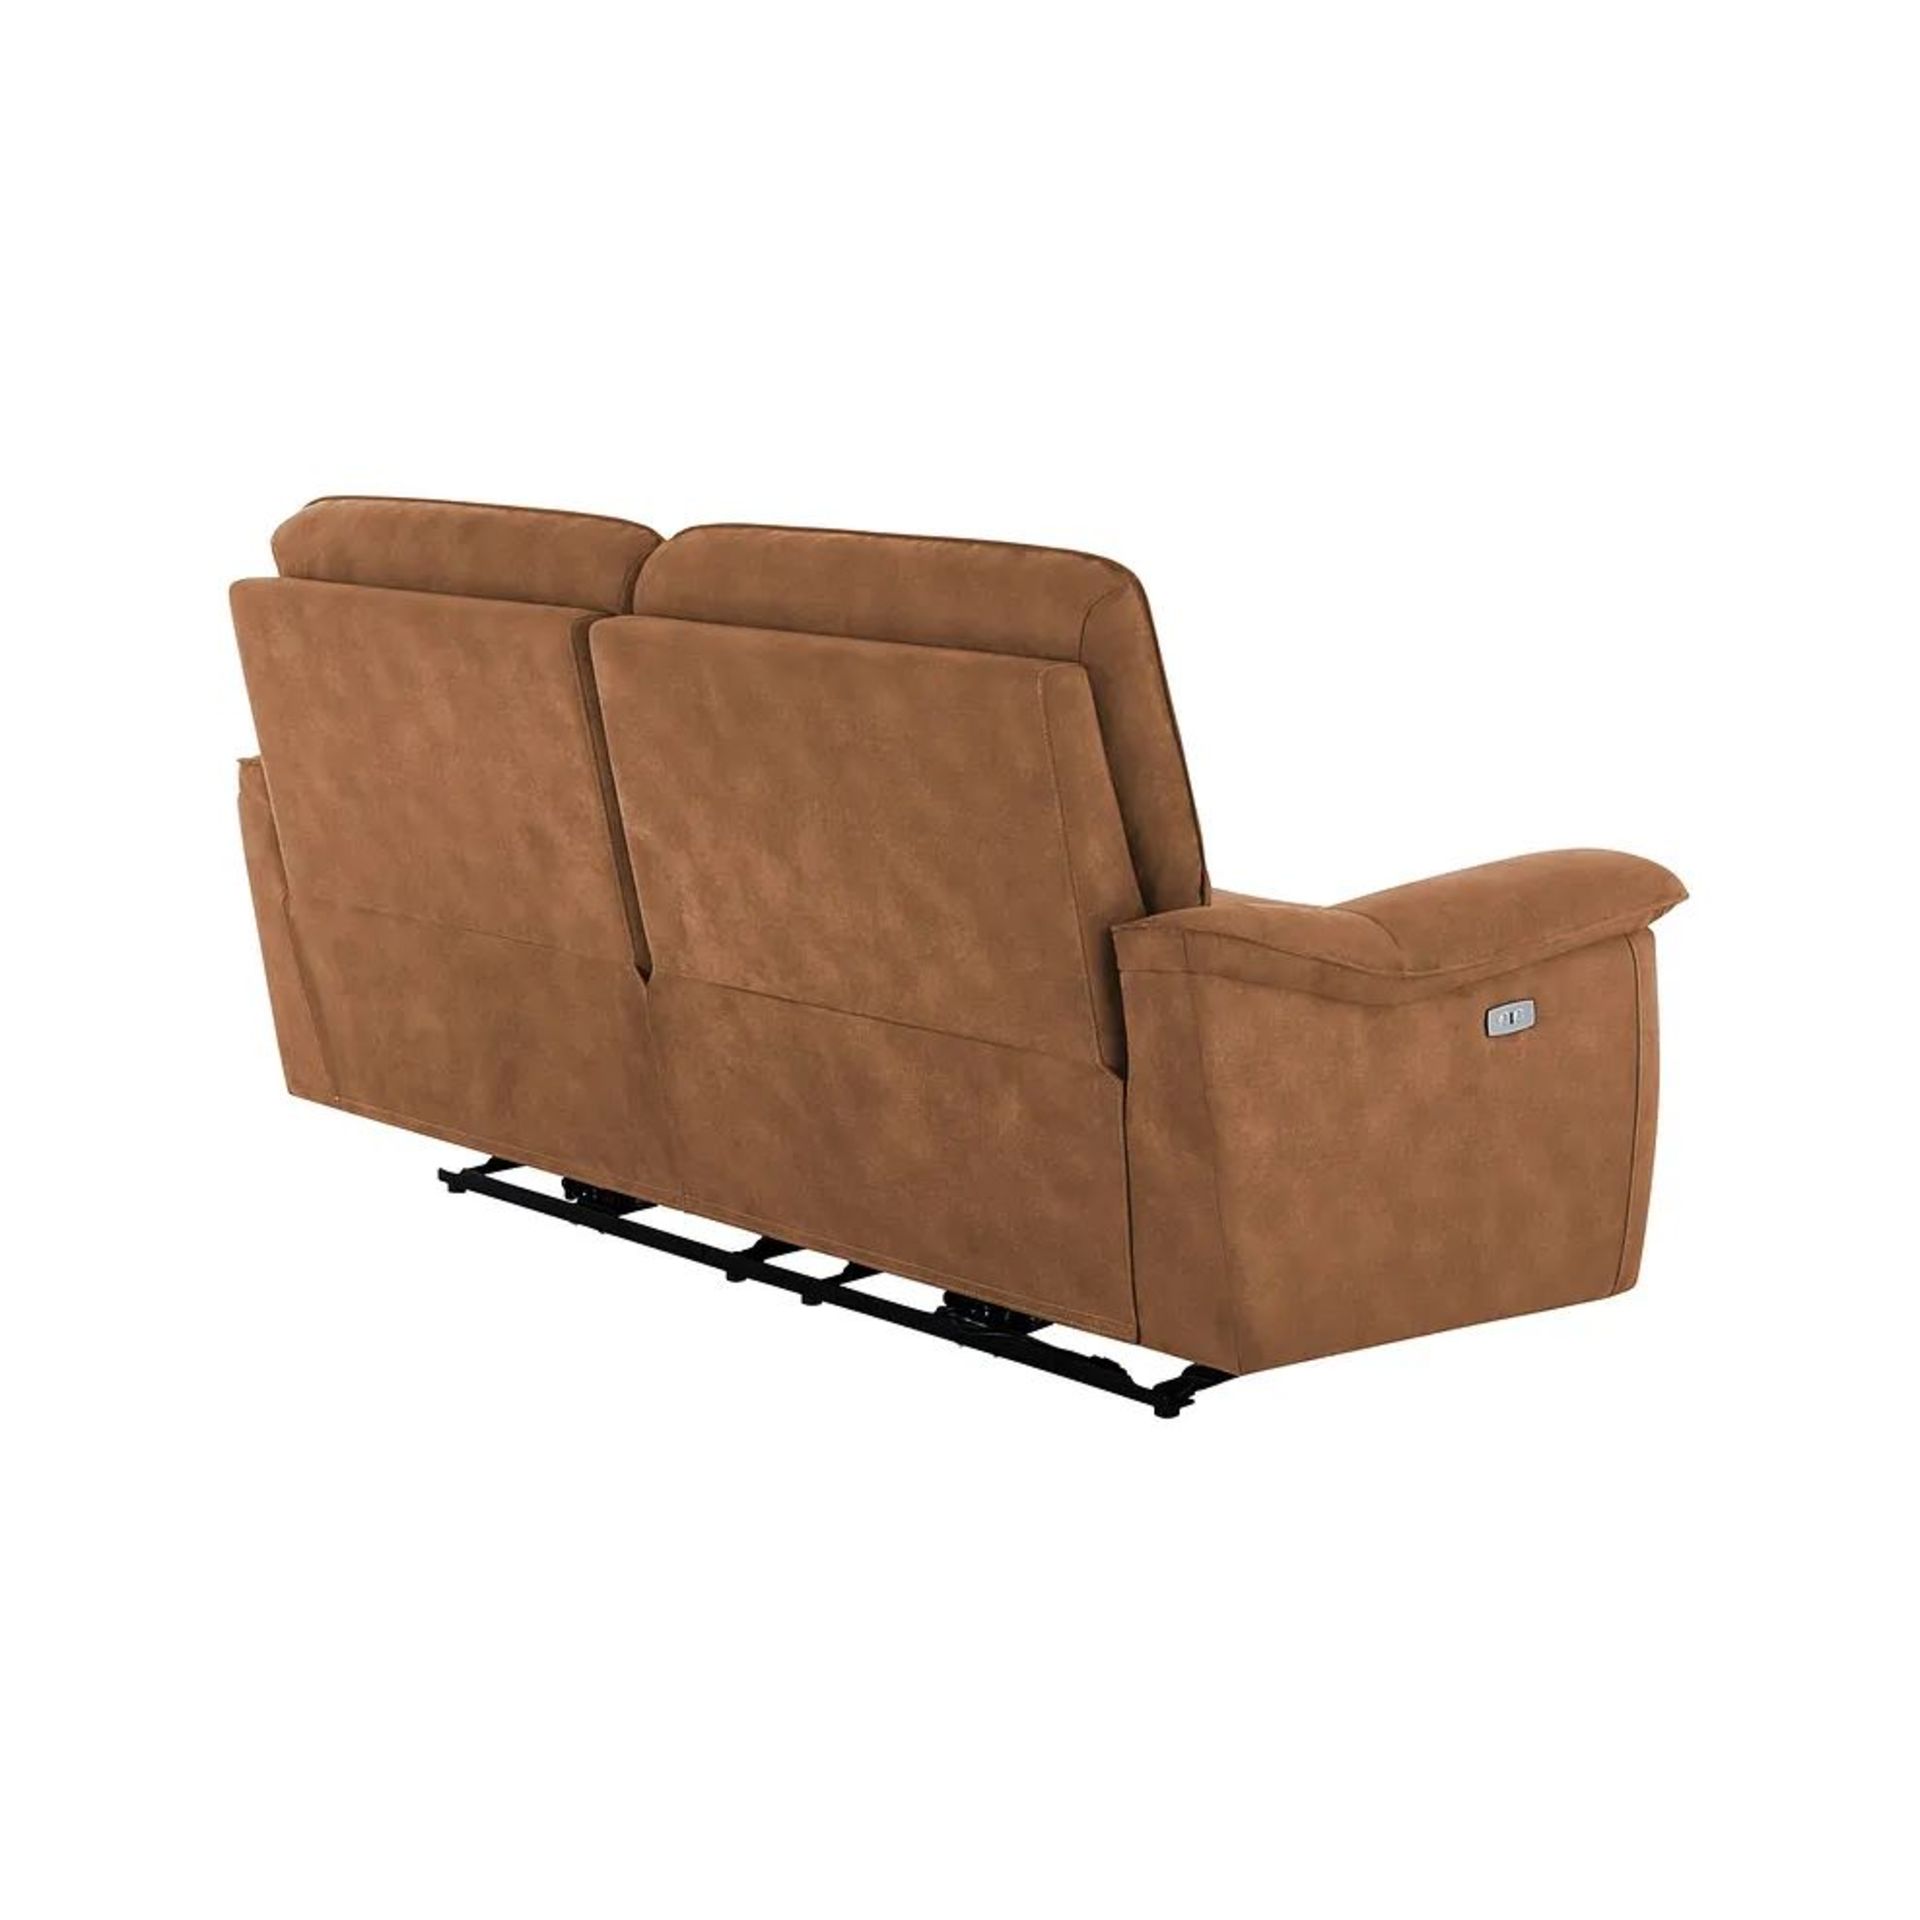 BRAND NEW CARTER 3 Seater Electric Recliner Sofa - BROWN FABRIC. RRP £1299. Shown here in Ranch - Image 6 of 12